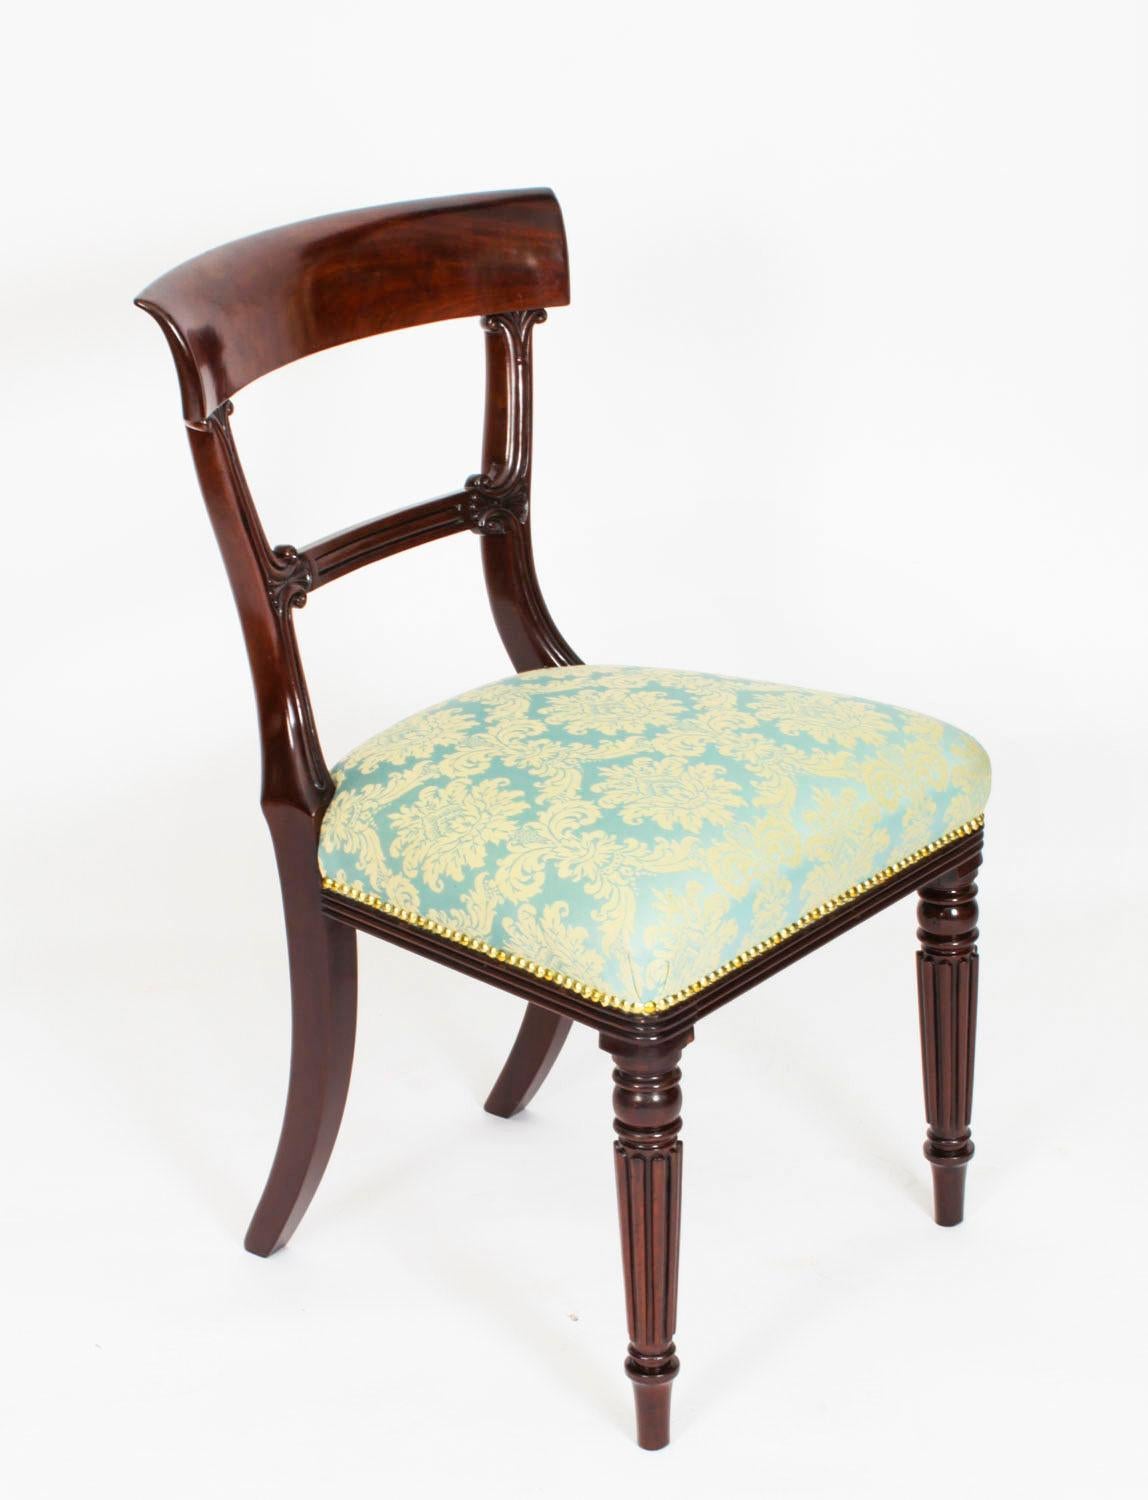 This is a fantastic English set of eight antique  William IV barback dining chairs, circa 1830 in date.

The set comprising eight sidechairs with seats that have been reupholstered in a striking azur fabric, and  raised on  reeded baluster front